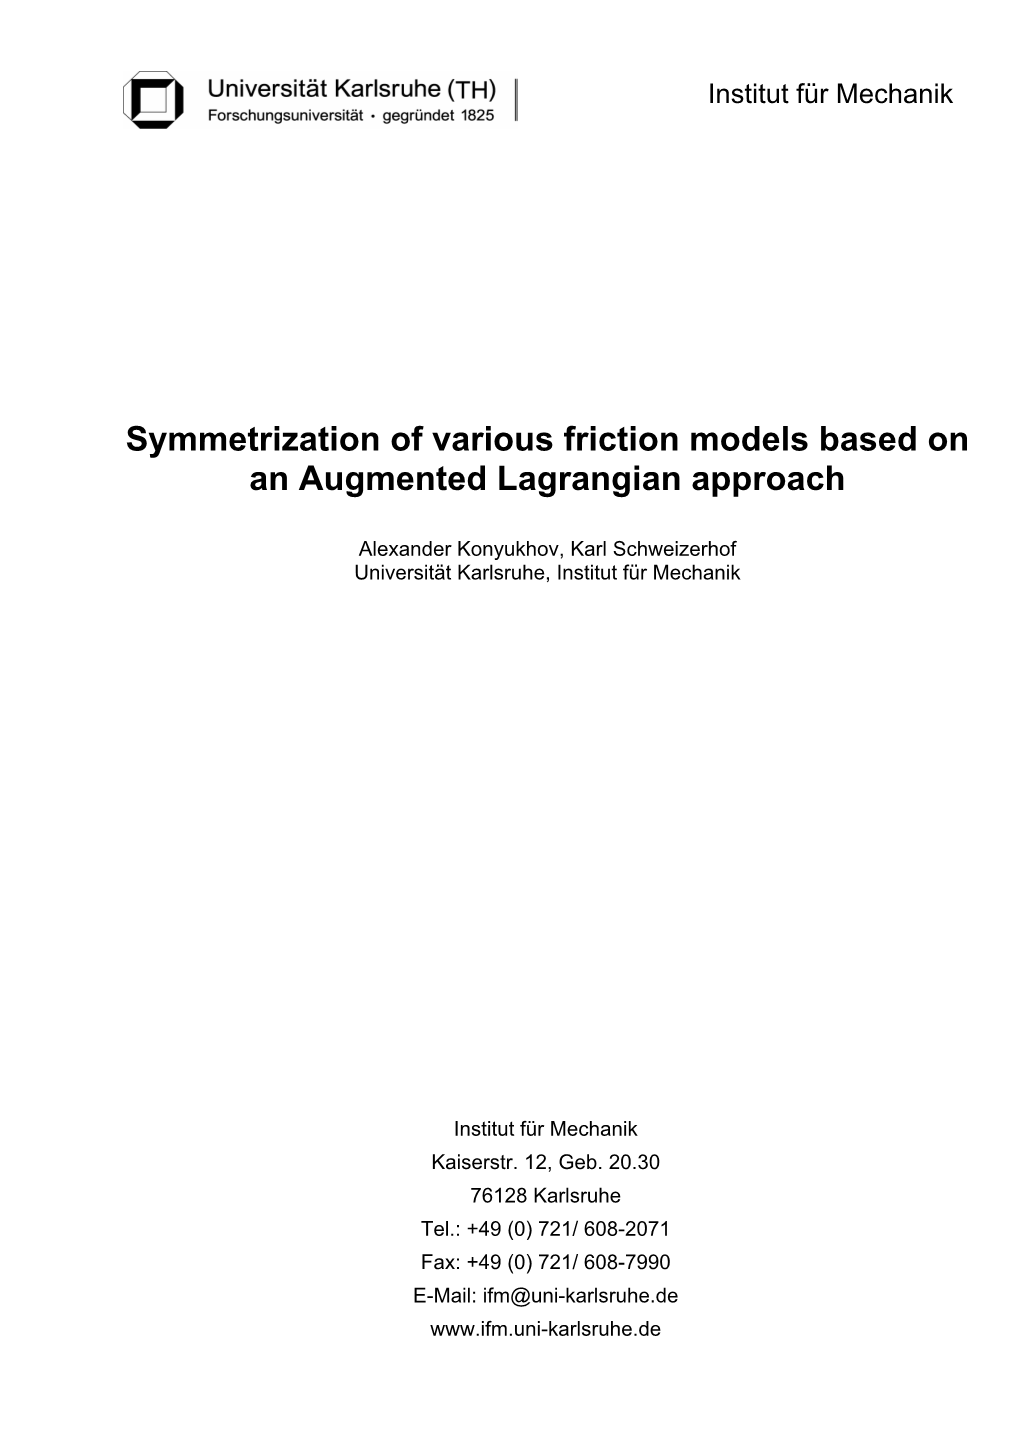 Symmetrization of Various Friction Models Based on an Augmented Lagrangian Approach